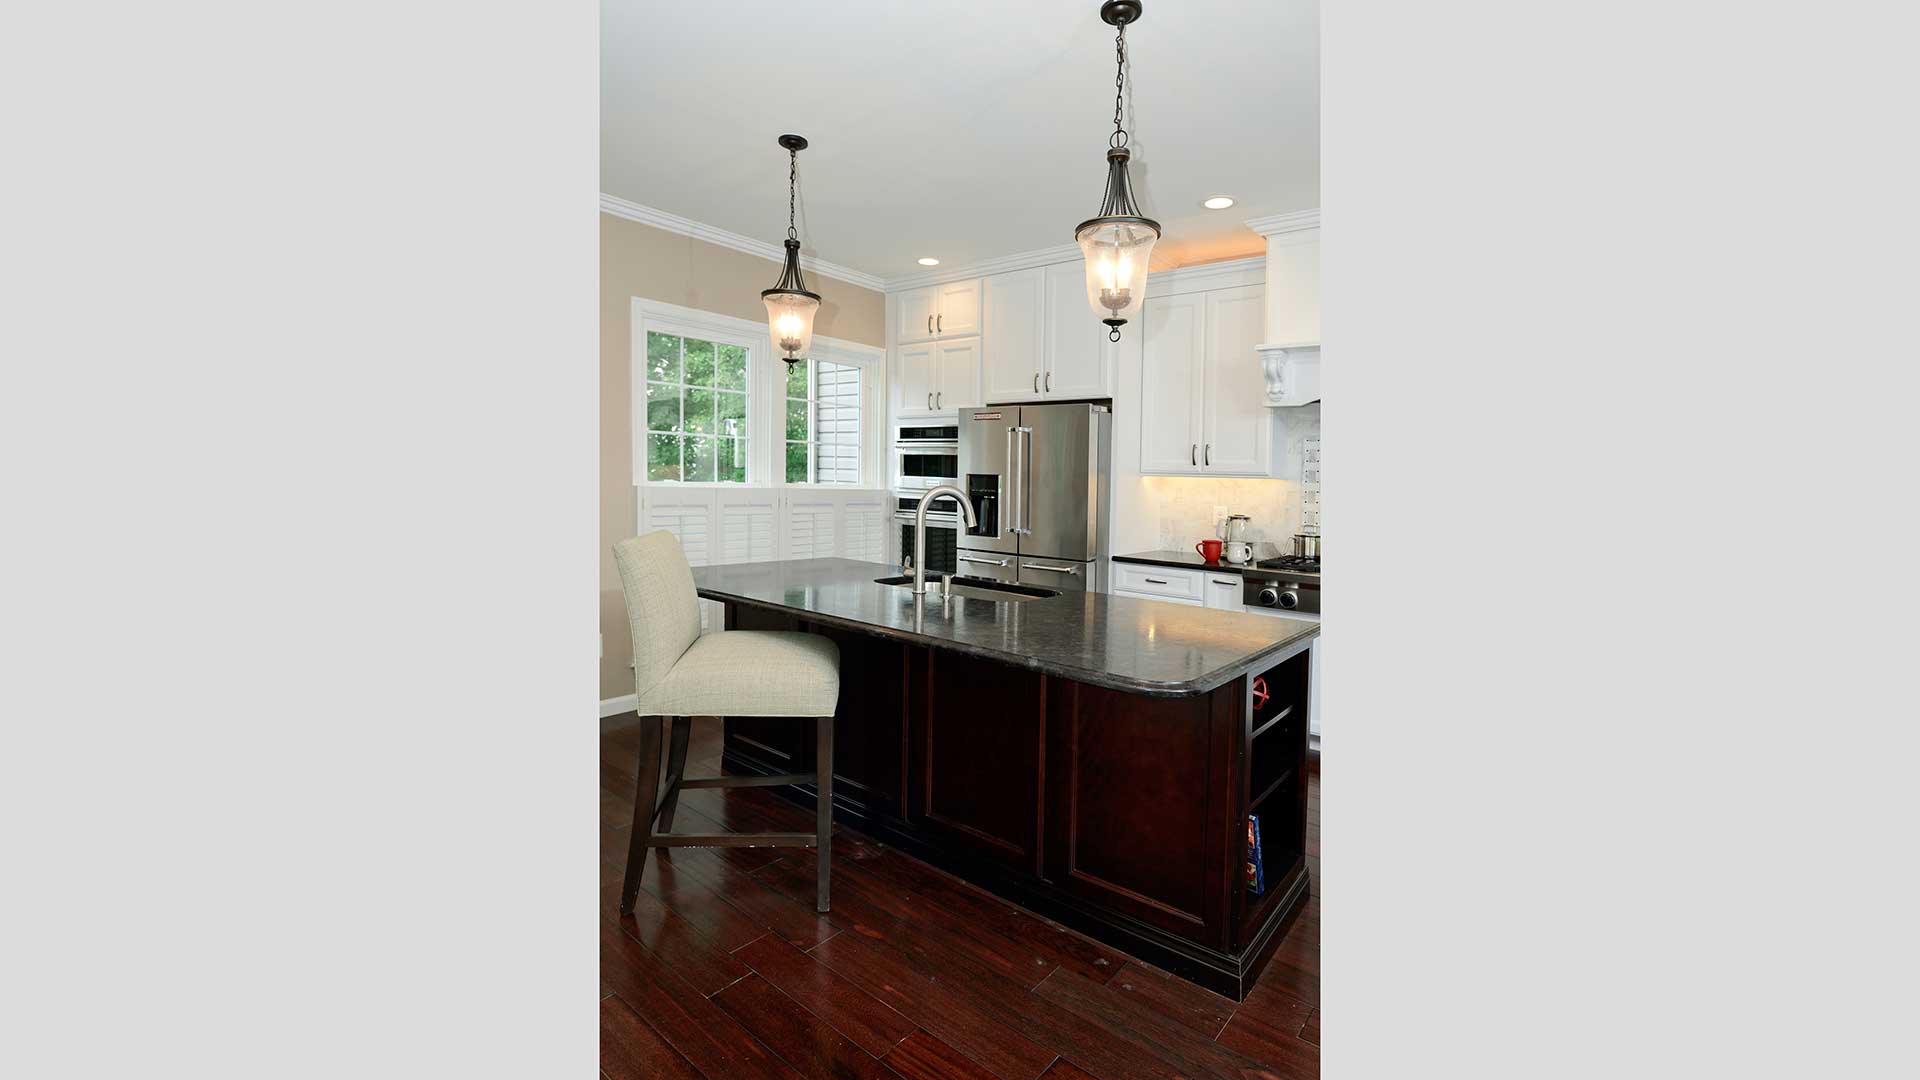 2016 NARI Capital CotY Honorable Mention Award Winner, Residential Kitchen $30,000 to $60,000